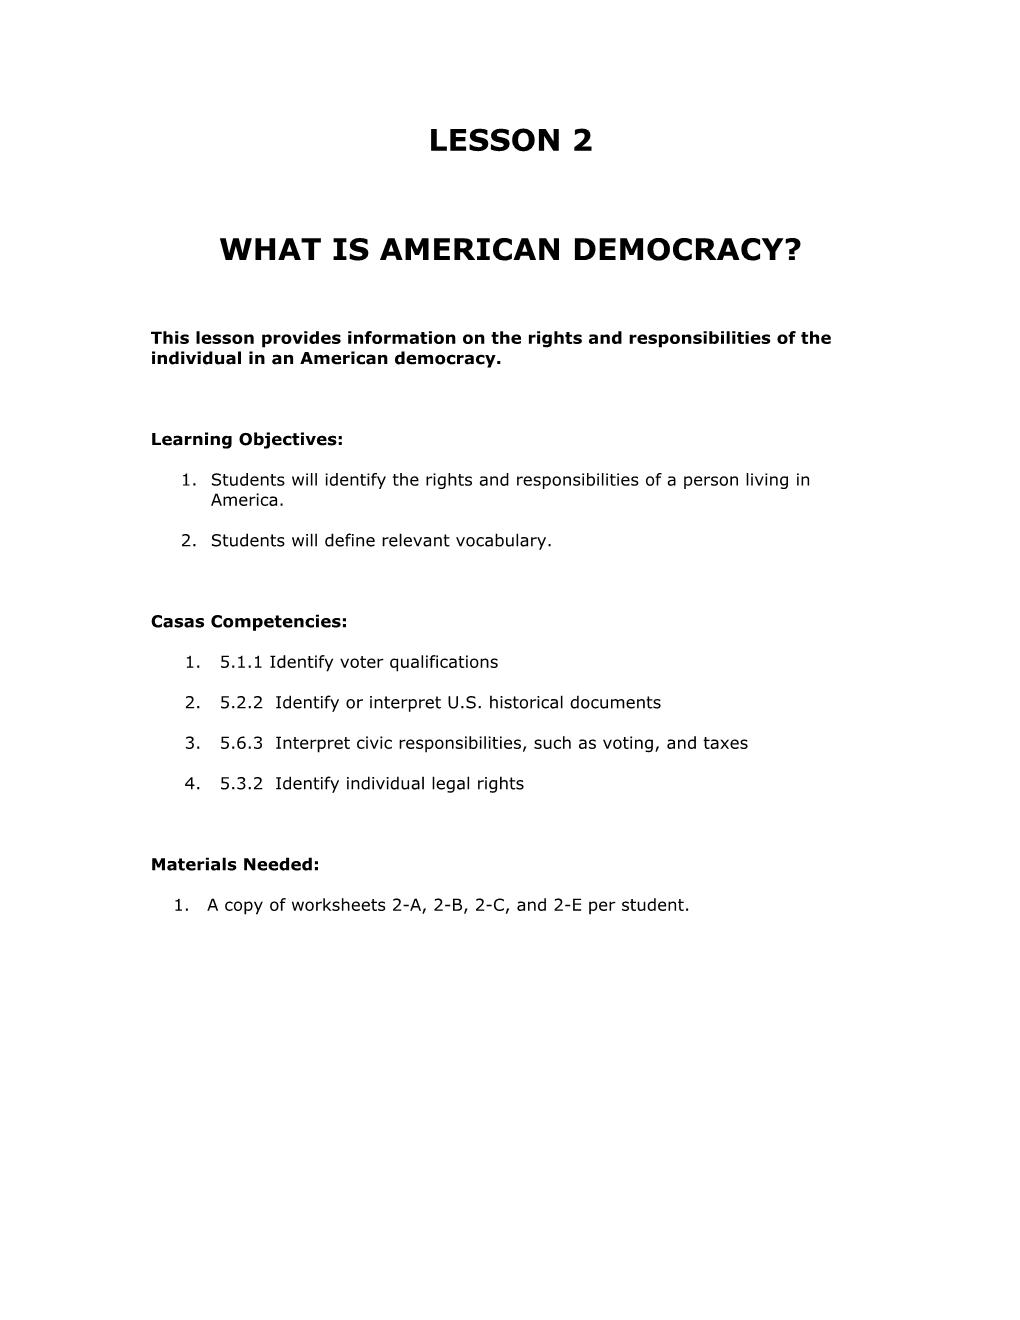 What Is American Democracy?